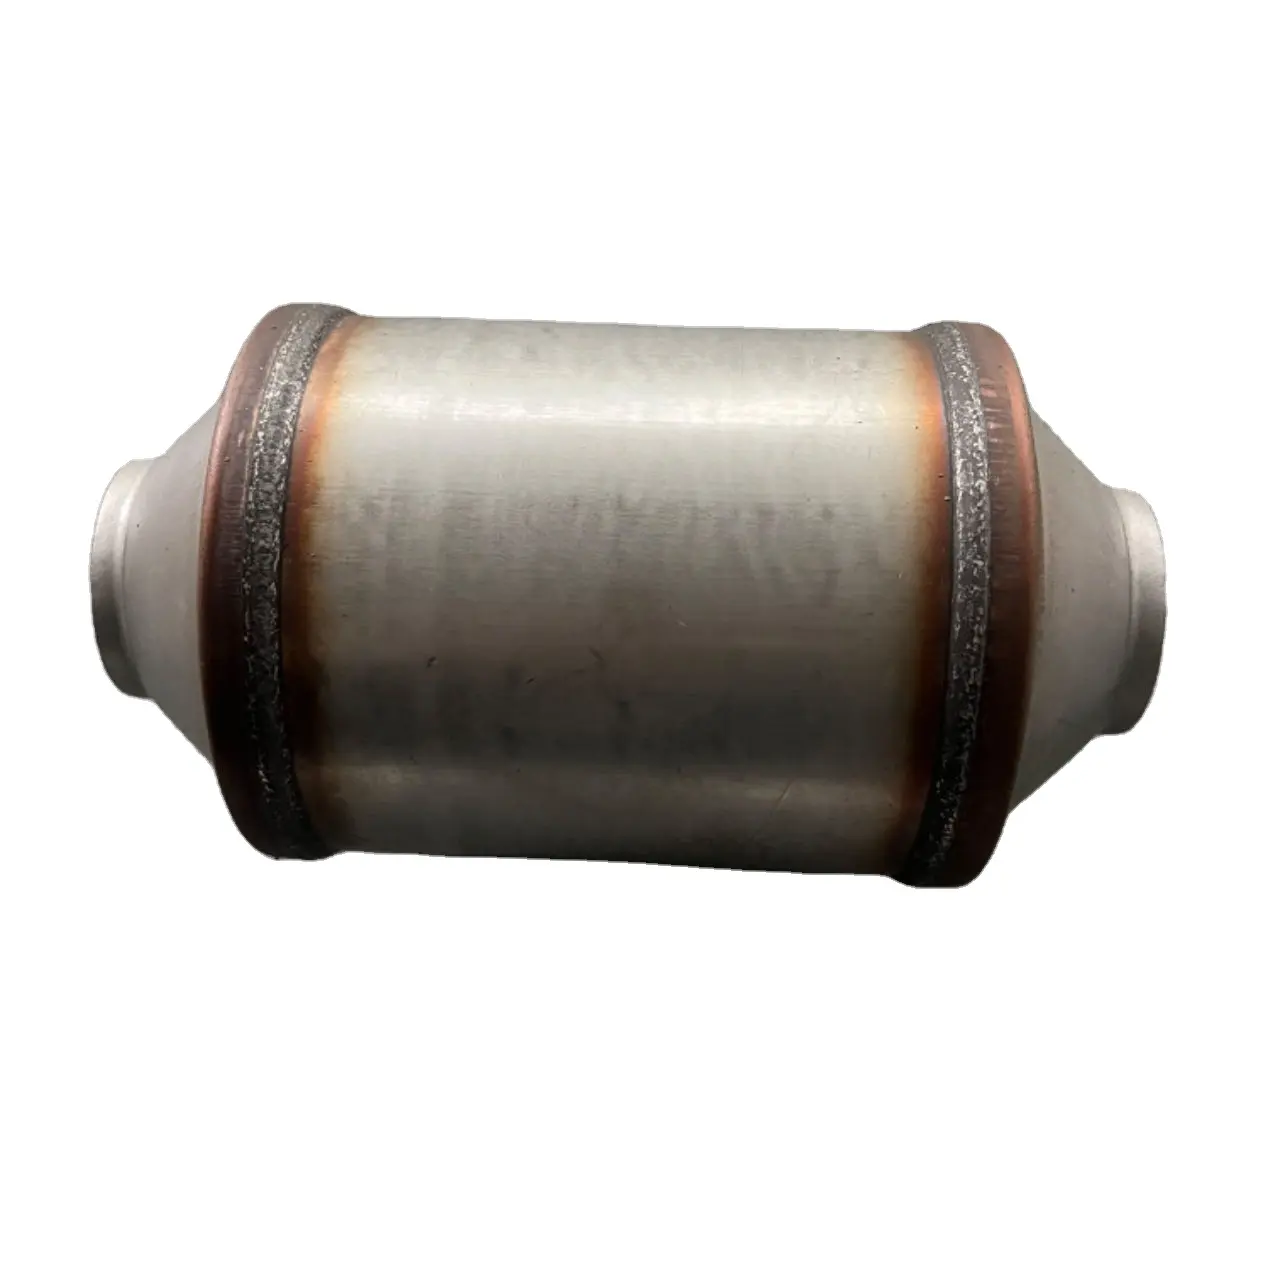 Euro 0-6 Universal Catalytic Converters for Exhaust Purification and Emission Control